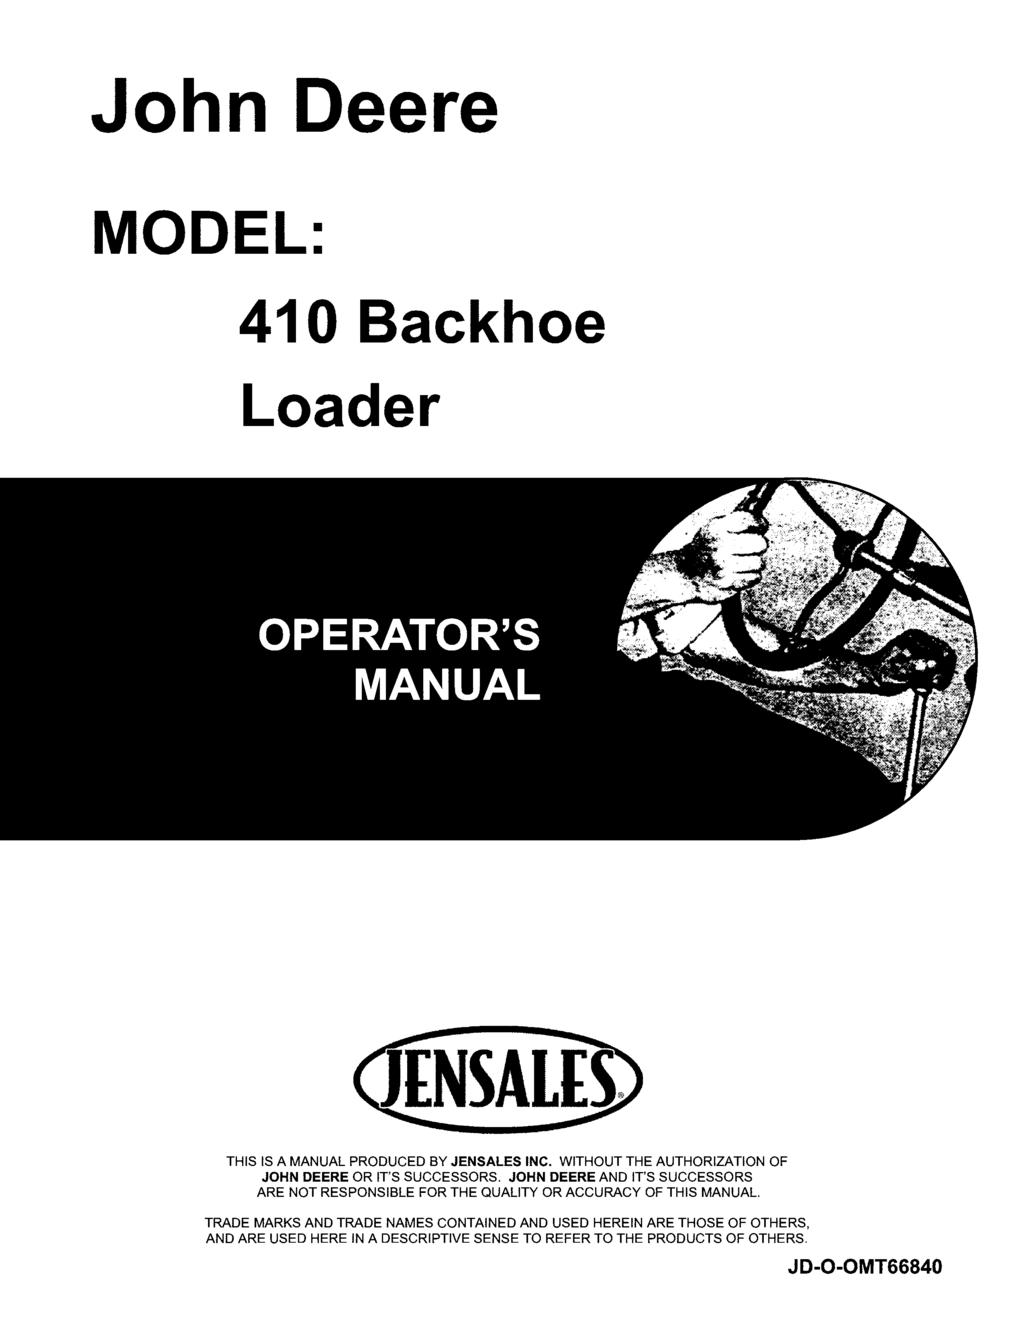 John Deere MODEL: 410 Backhoe Loader THIS IS A MANUAL PRODUCED BY JENSALES INC. WITHOUT THE AUTHORIZATION OF JOHN DEERE OR IT'S SUCCESSORS.